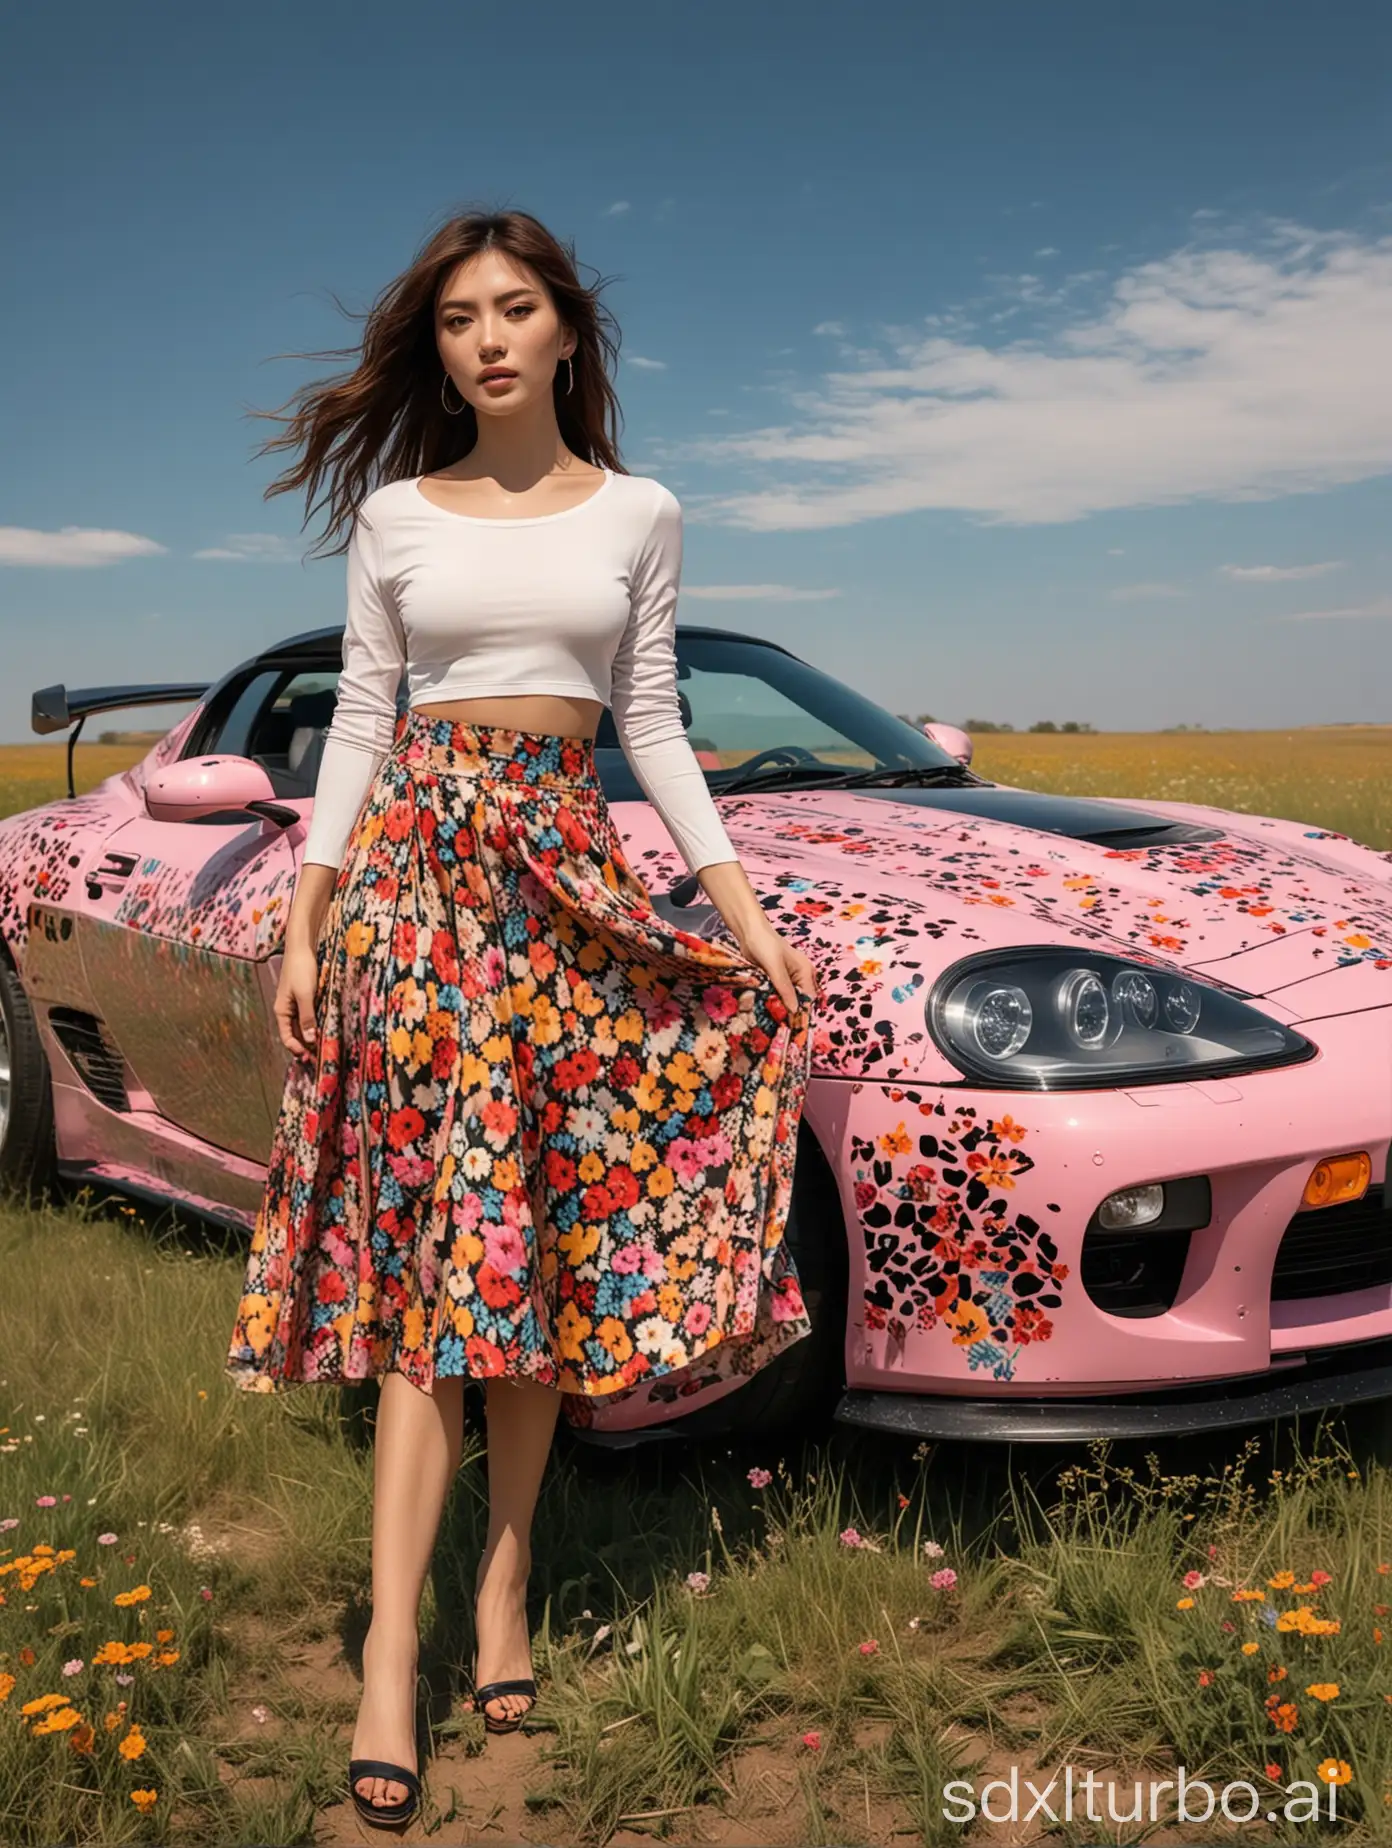 grassland, (flower leopard), high-end sports car, oriental modern fashion woman, girl's skirt blown by the wind, their photo is very harmonious, colorful, Hollywood blockbuster visuals, 2k